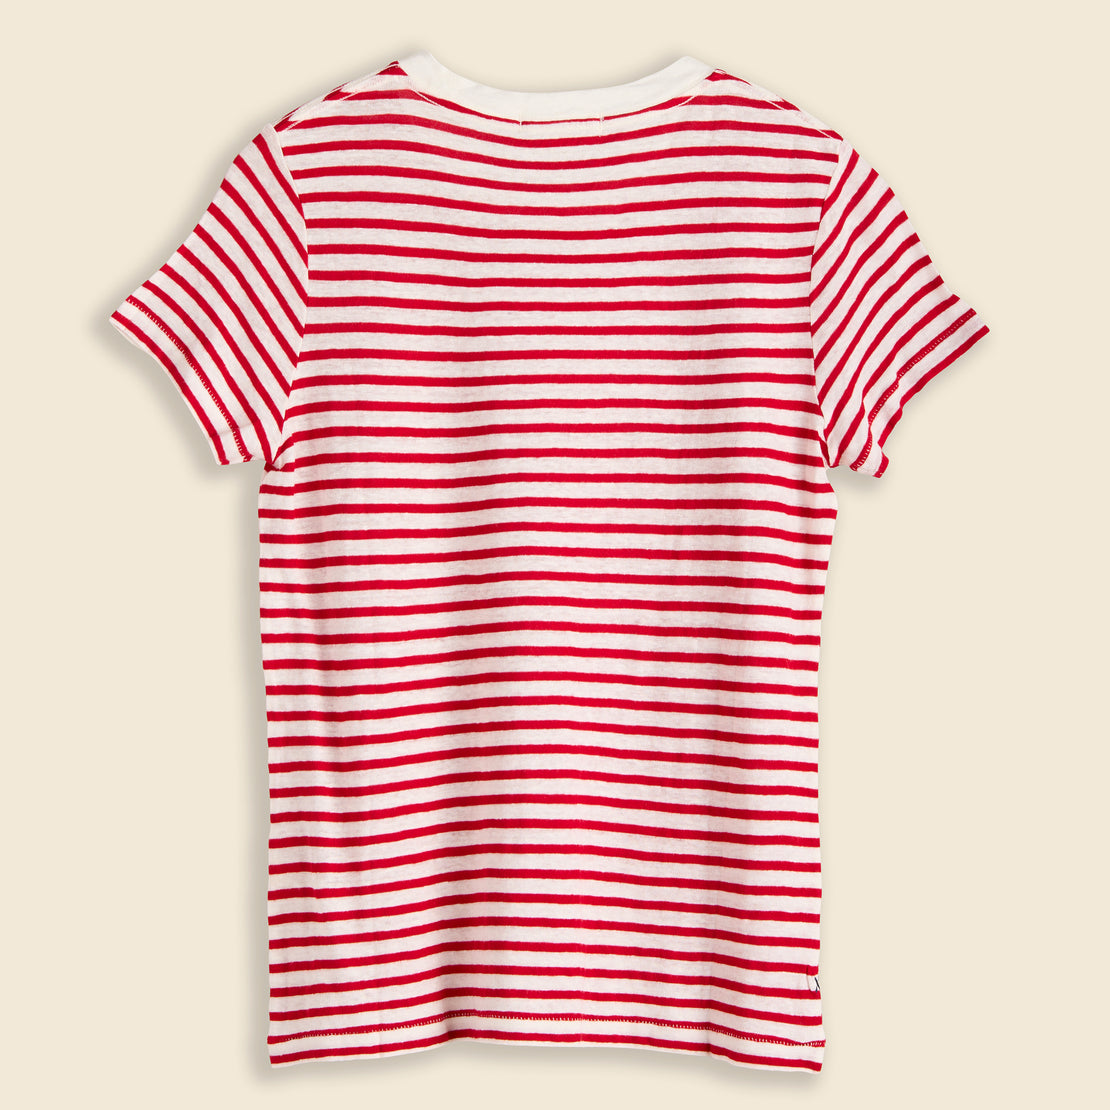 Prospect Linen Tee in Stripe - Red/White Stripe - Alex Mill - STAG Provisions - W - Tops - S/S Tee